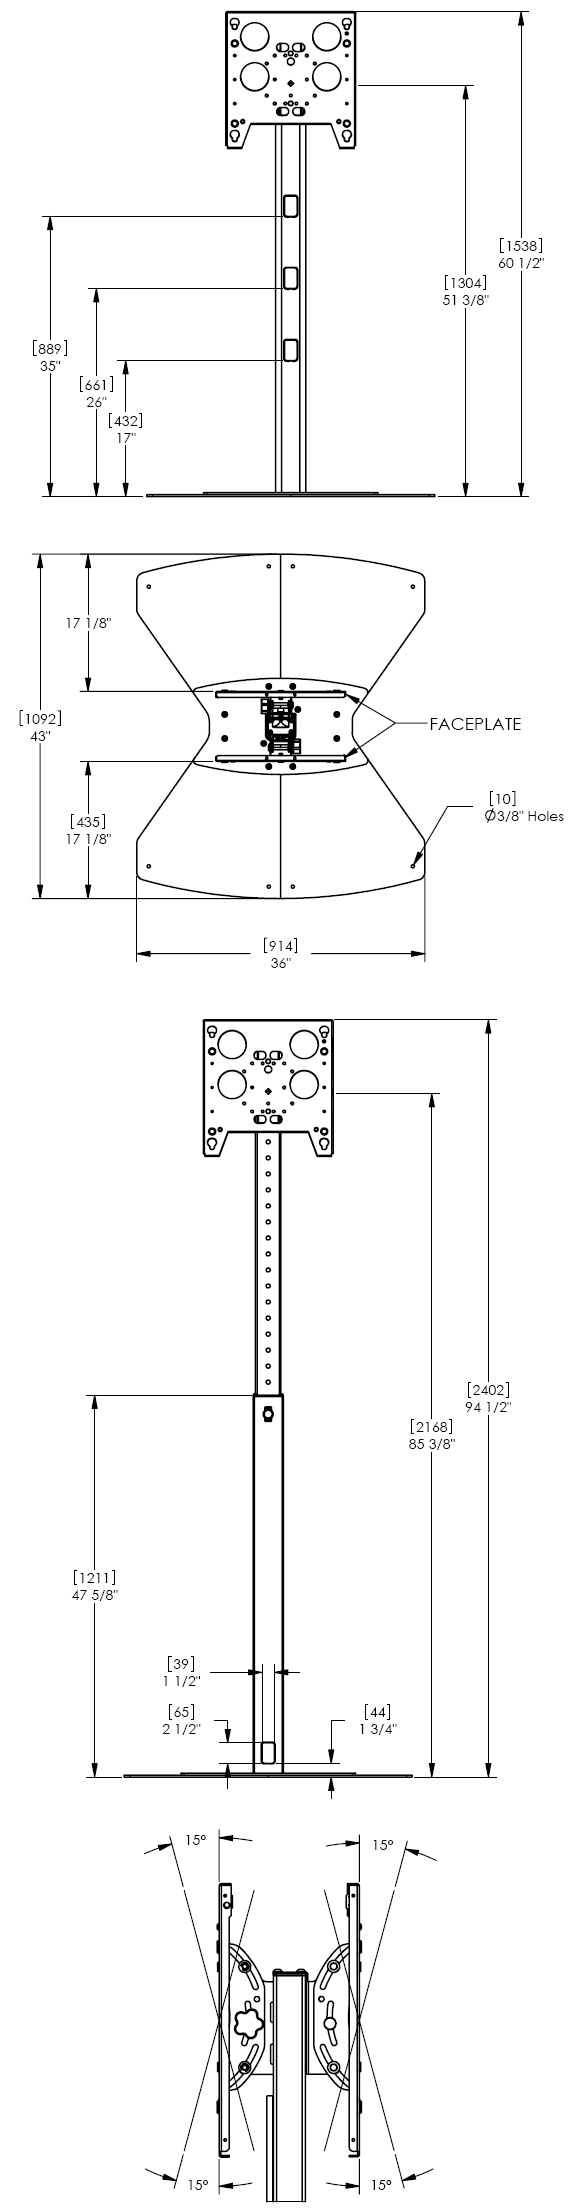 Technical Drawing for Chief PF22000B or PF22000S Flat Panel Dual Display Floor Stand